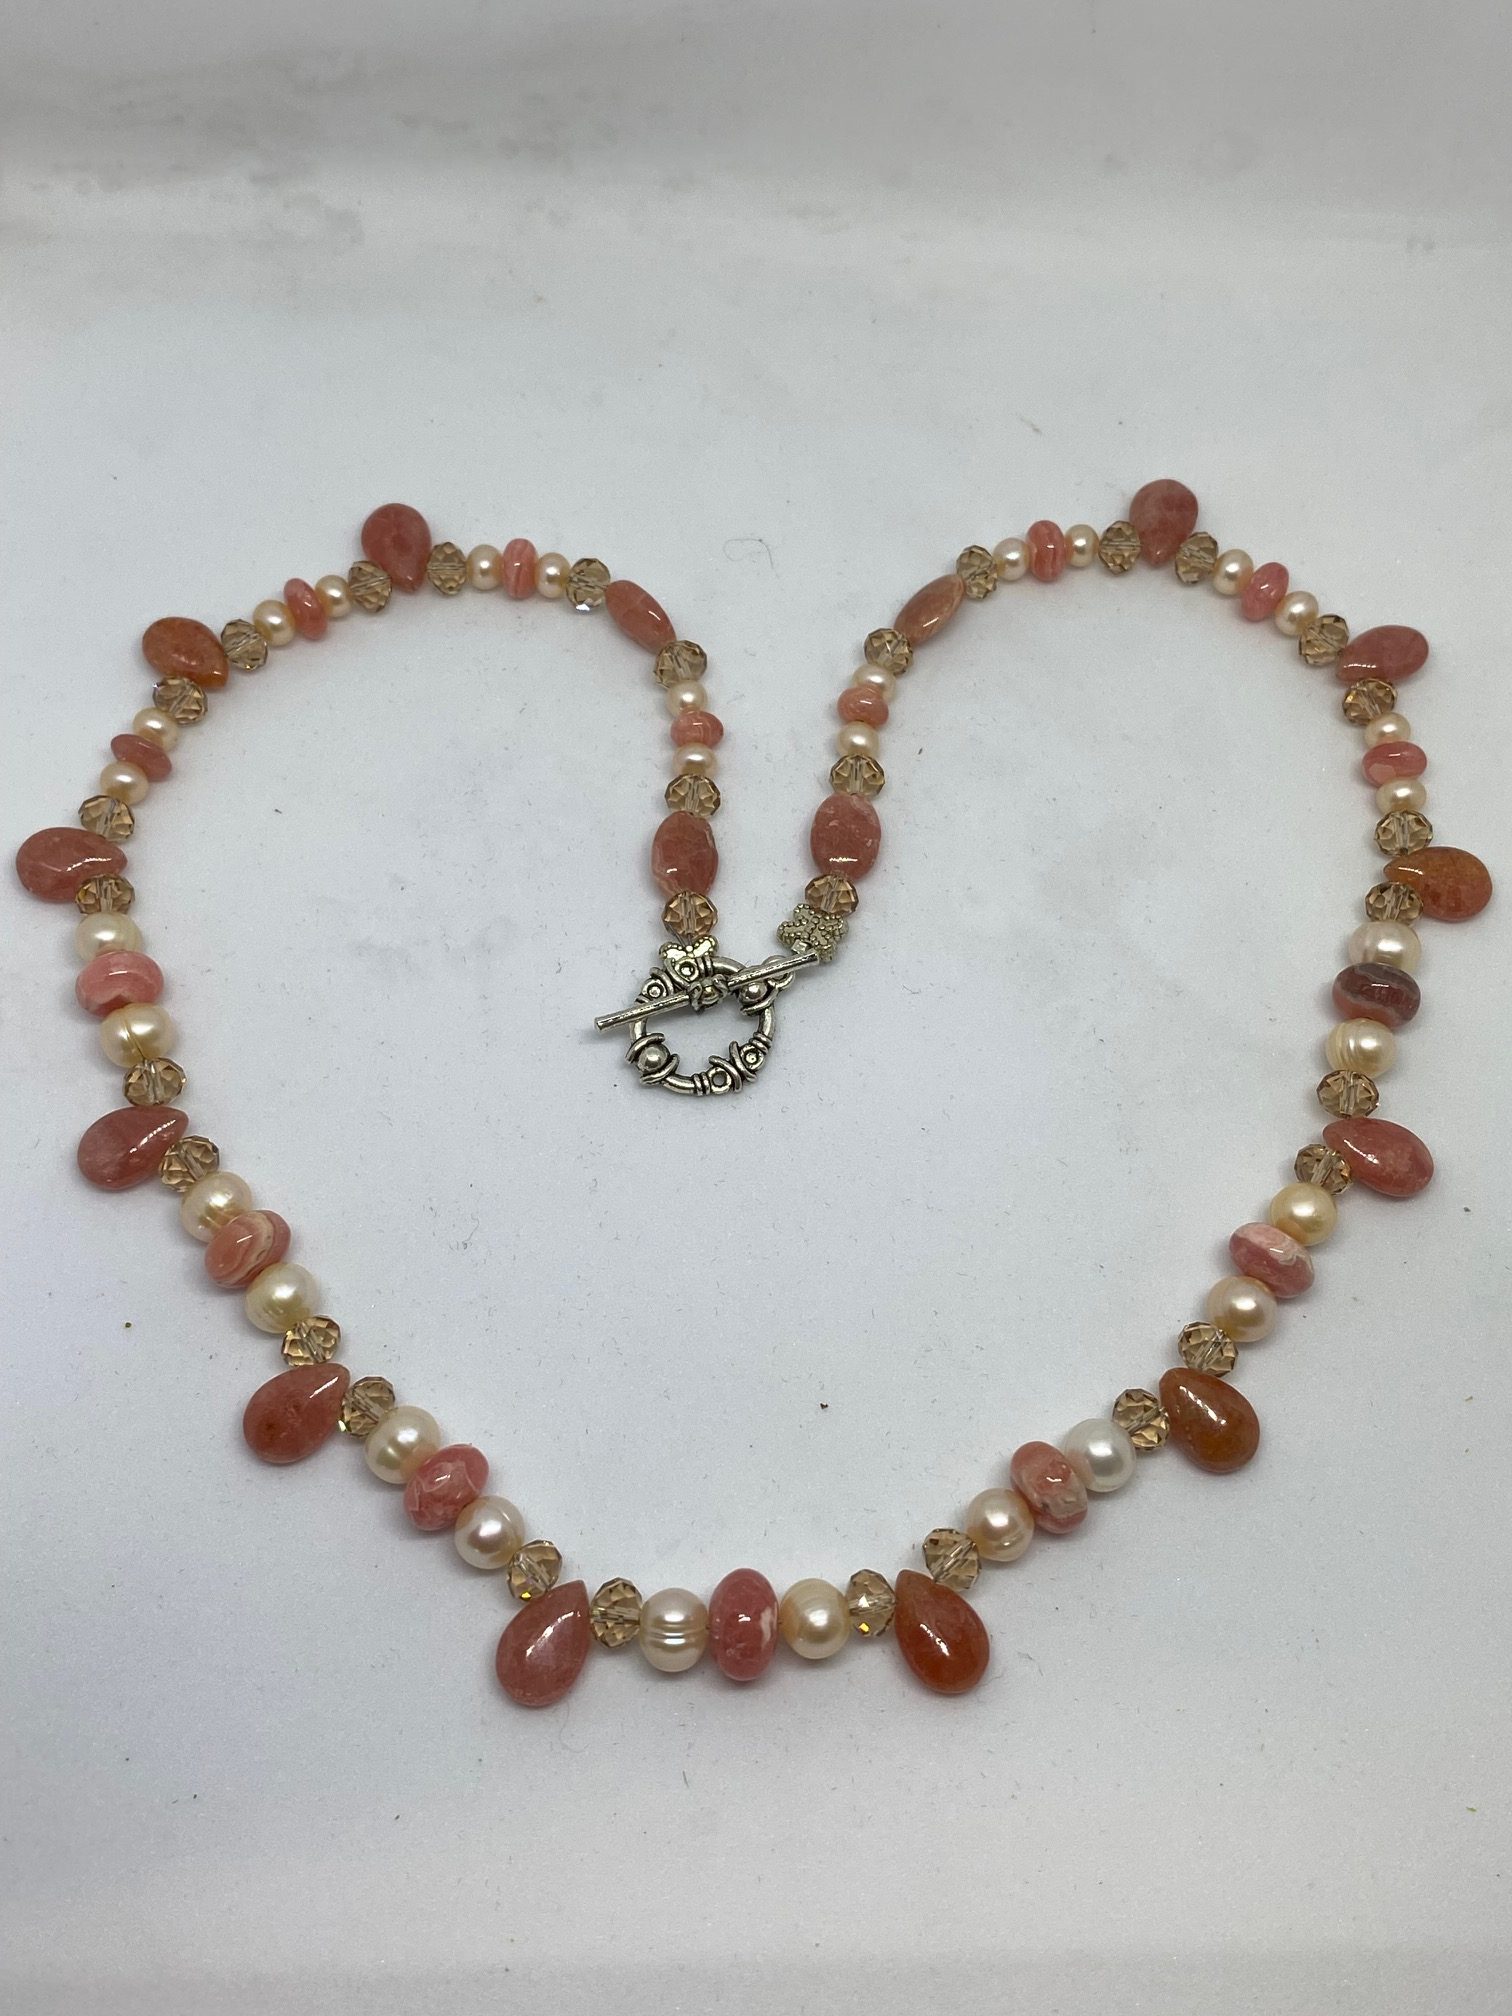 Rhodochrosite, Pearl, and Swarovski Crystal Necklace This necklace supports Joy and Tranquility